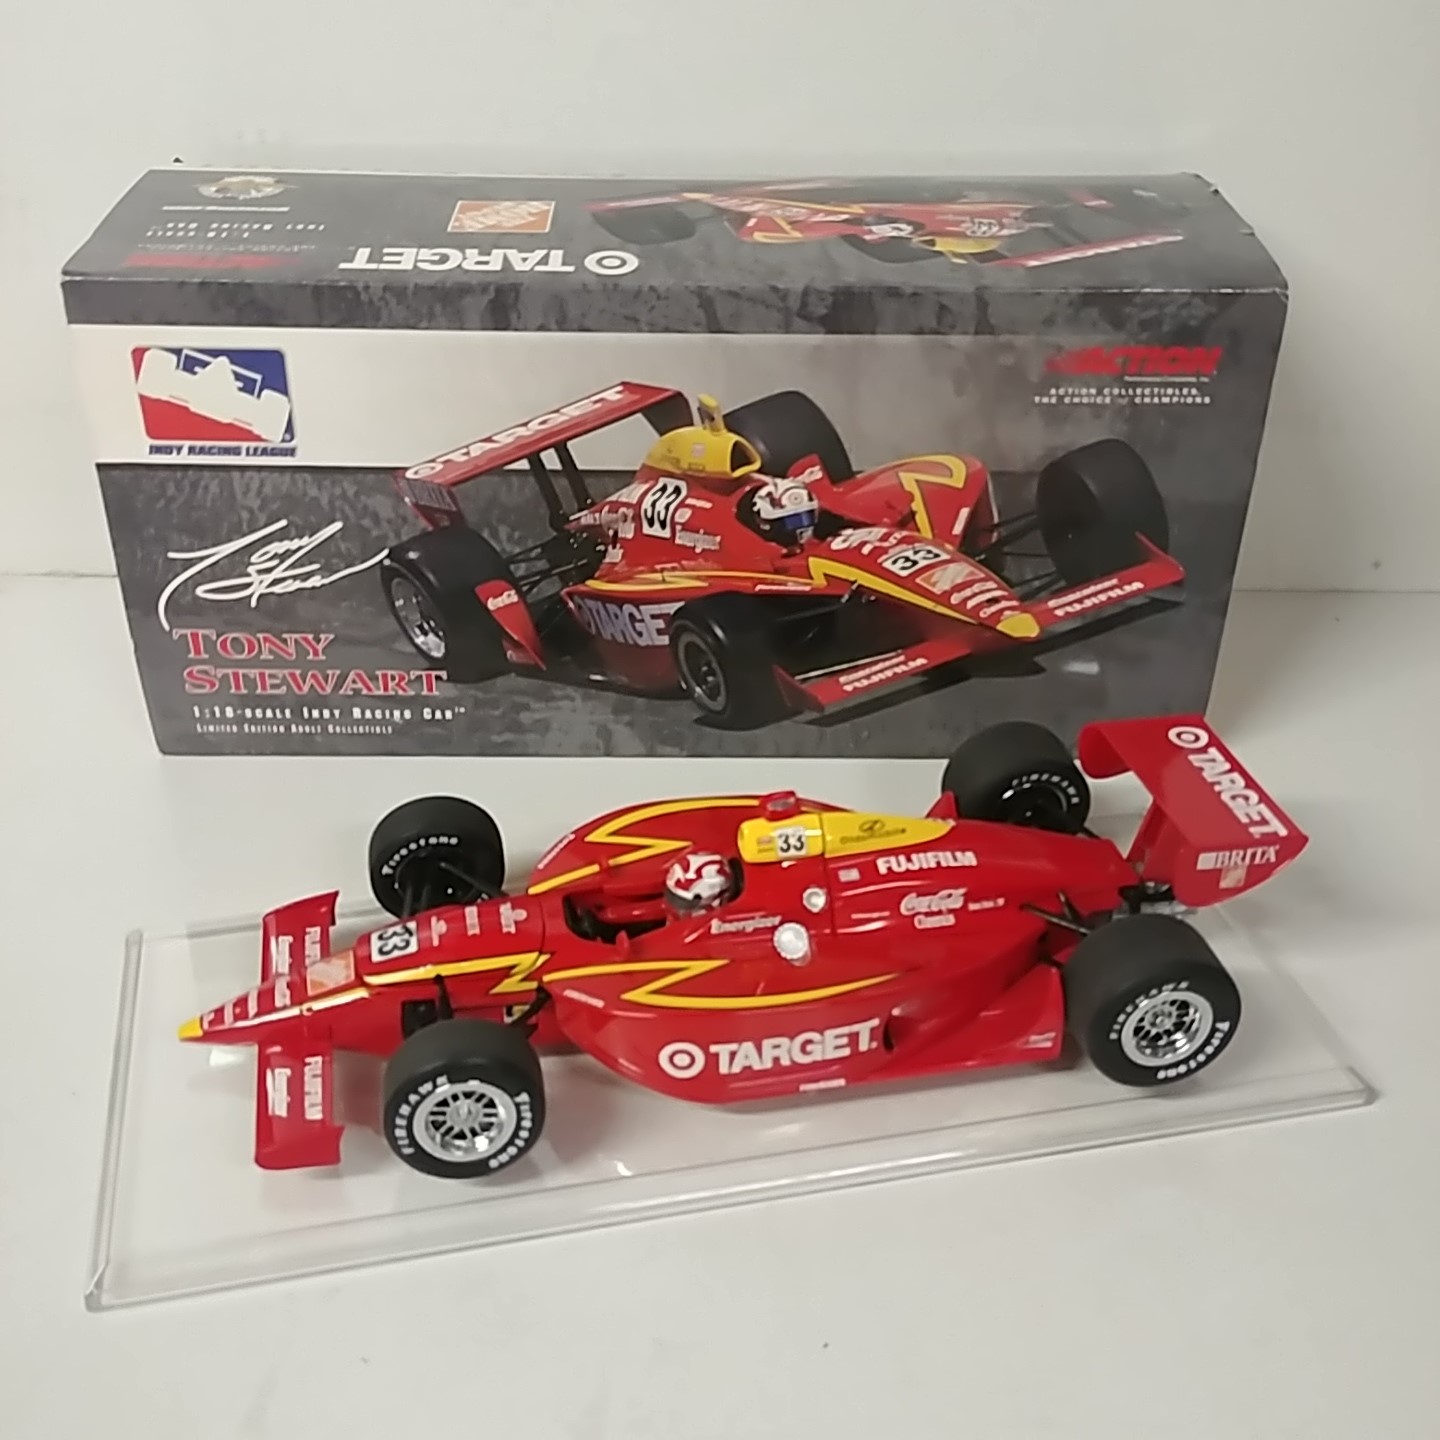 2001 Tony Stewart 1/18th Target Home Depot G-Force "Double Duty" Indy car